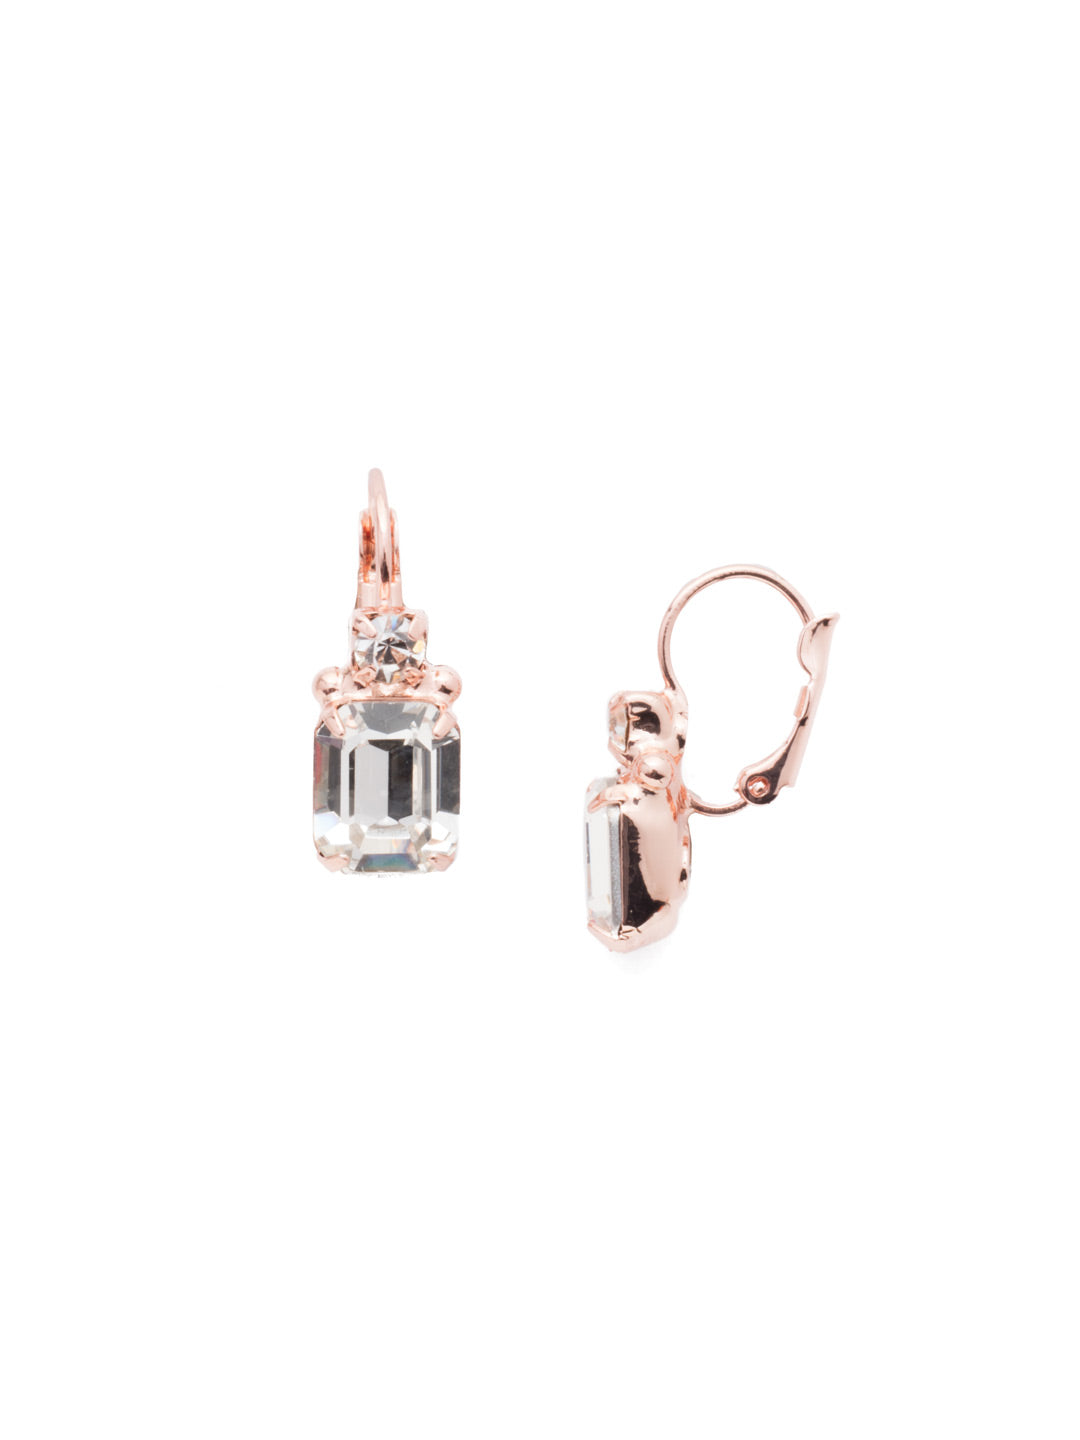 Octavia Studded Dangle Earrings - EEA7RGCRY - <p>The Octavia Studded Dangle Earrings combine simplistic beauty and sparkle, featuring a cushion emerald cut crystal and accented by a small round crystal above. From Sorrelli's Crystal collection in our Rose Gold-tone finish.</p>